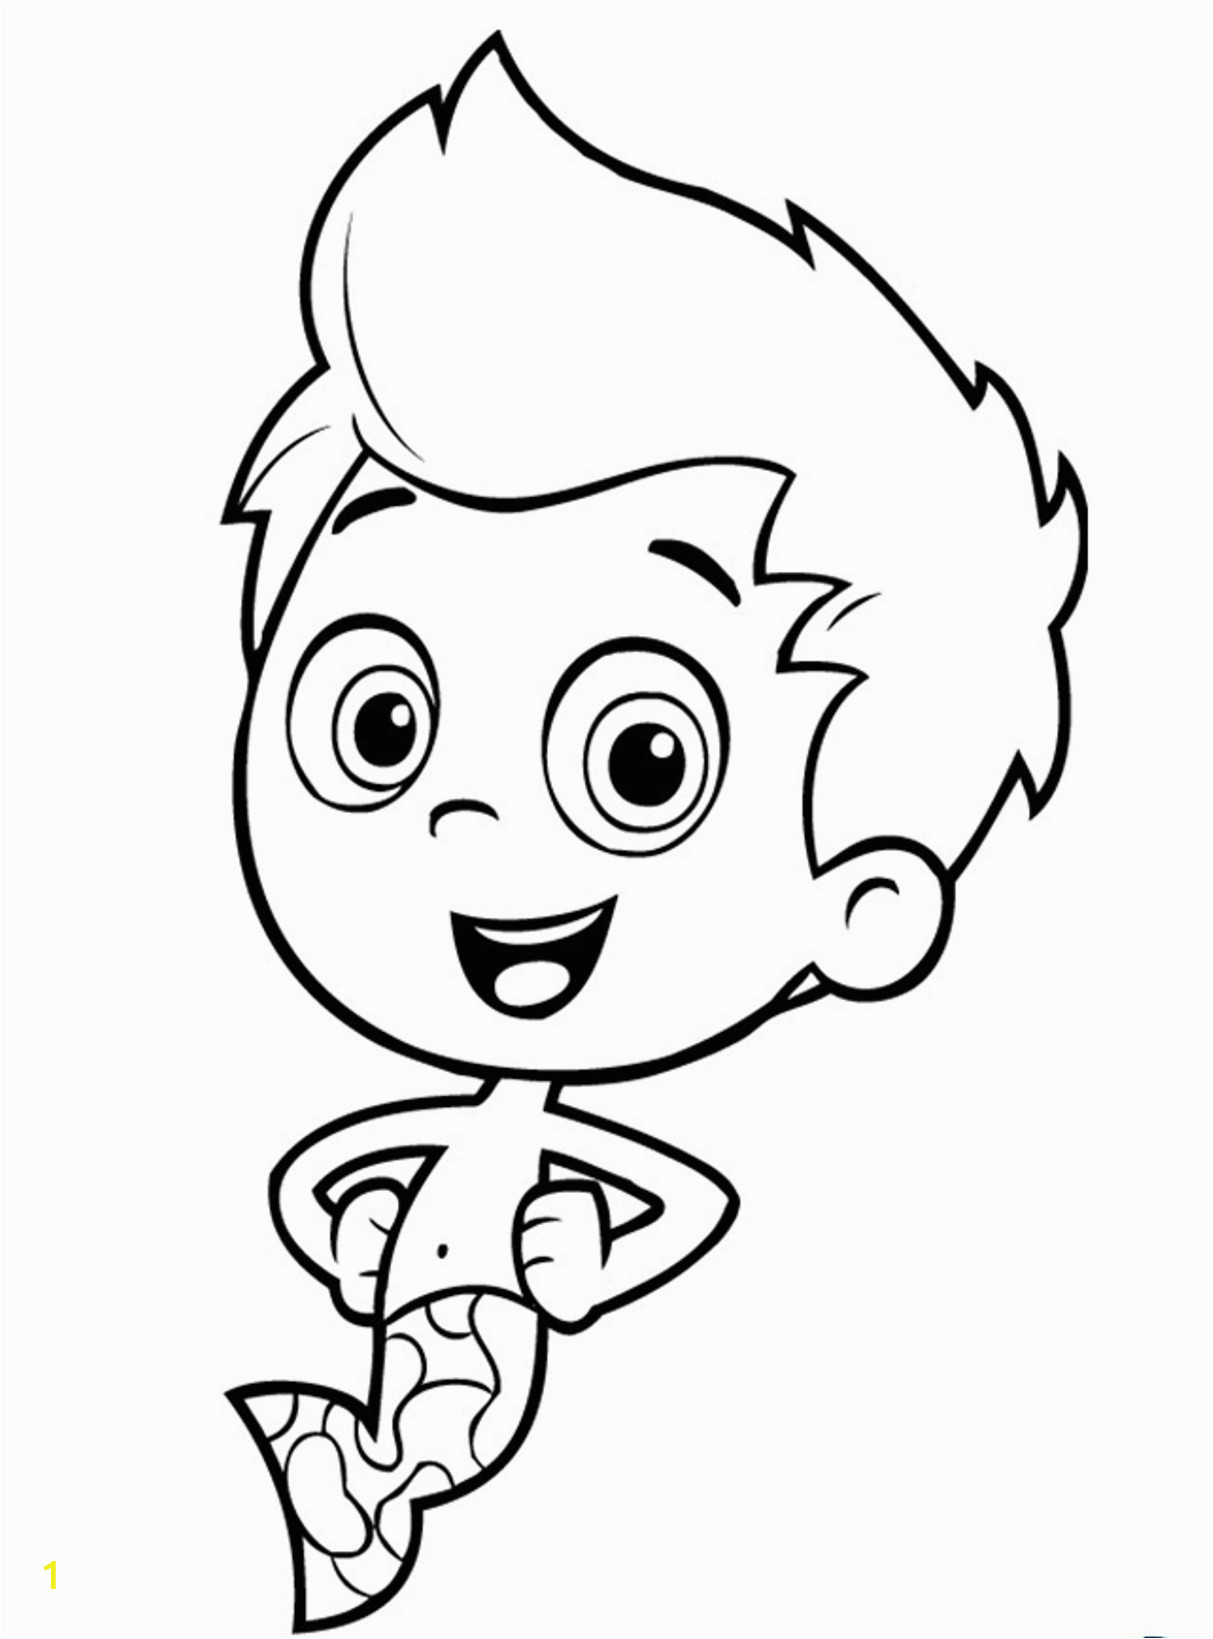 Free Printable Bubble Guppies Coloring Pages Bubble Guppies Coloring Pages Best Coloring Pages for Kids